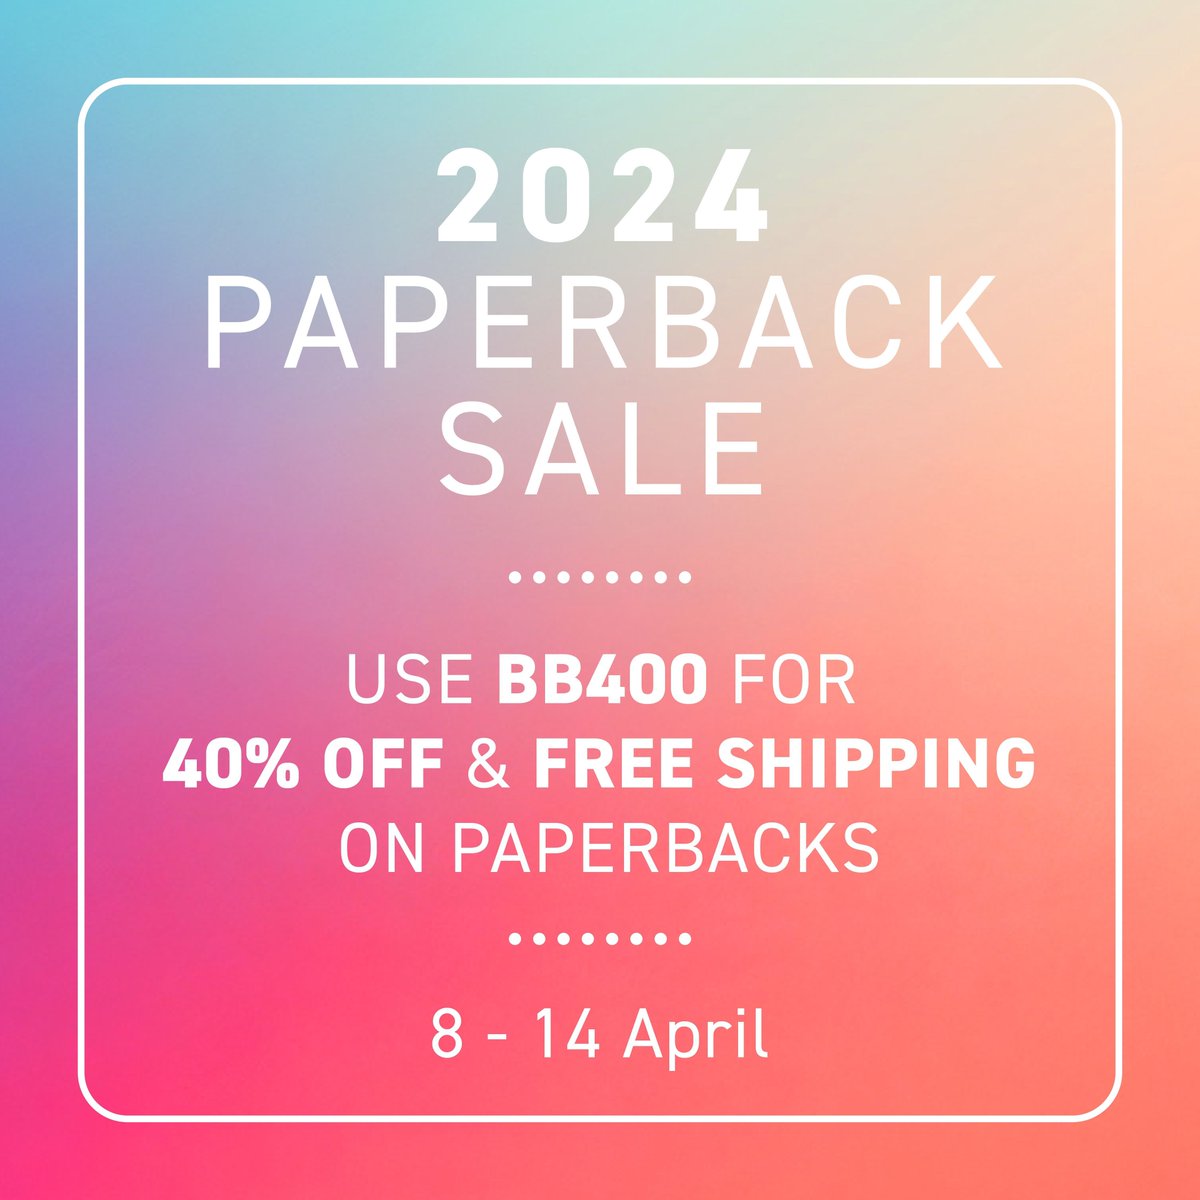 SALE NOW ON! - 40% off and free shipping with code BB400 - 1400 paperbacks - brand new and bestselling titles - #history, #film, #literature and more buff.ly/49fuKDT #BookSale #GermanStudies